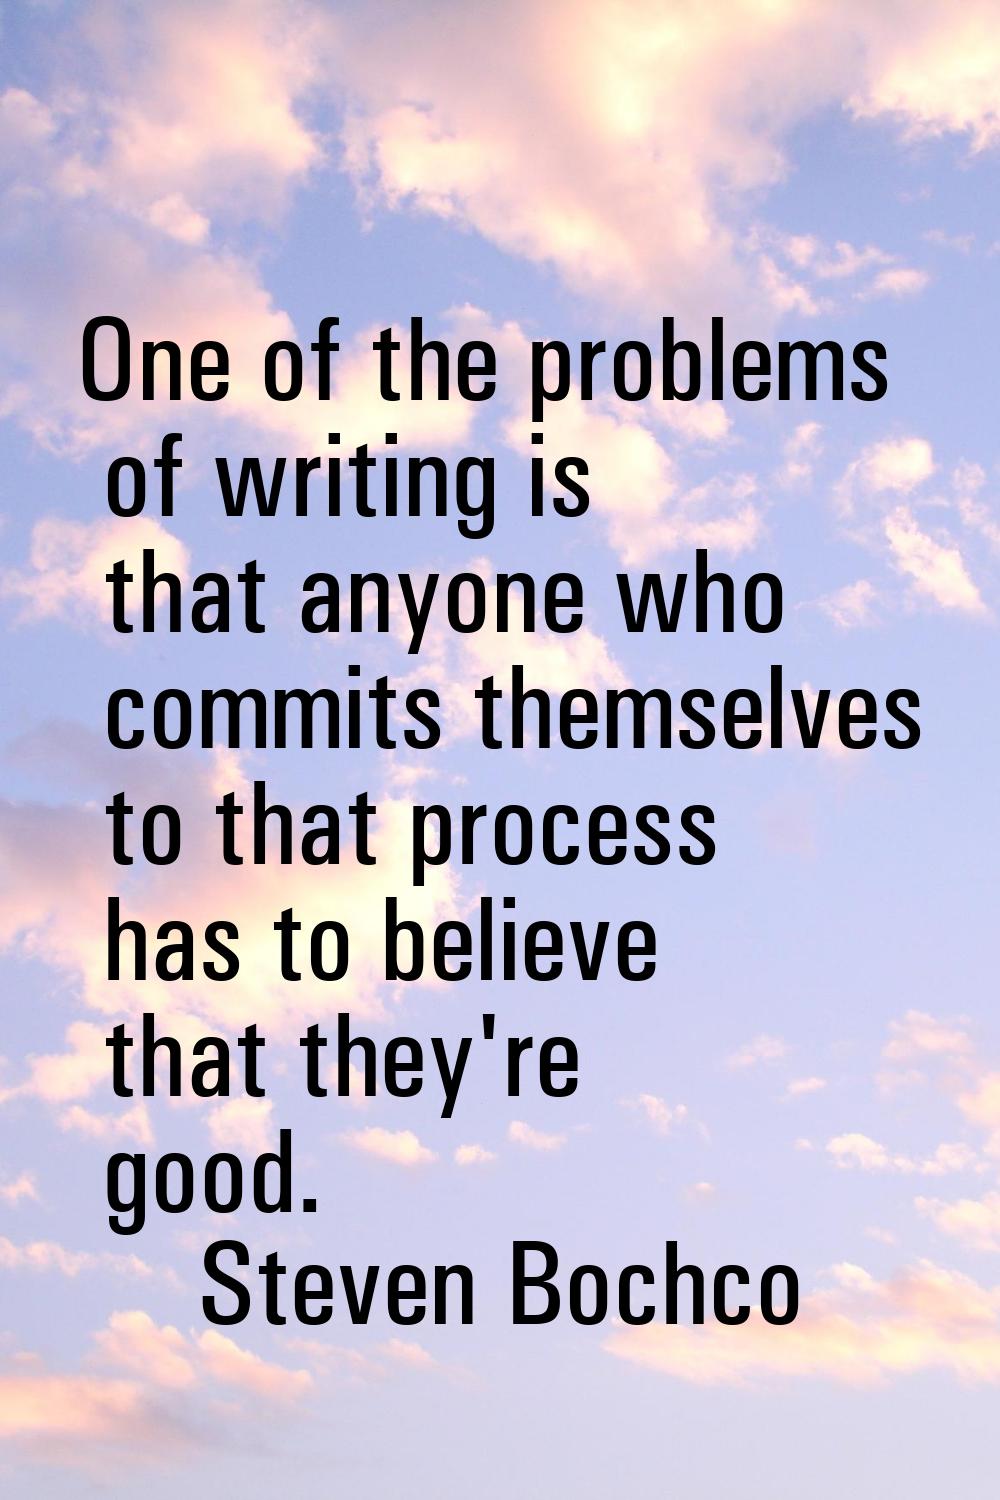 One of the problems of writing is that anyone who commits themselves to that process has to believe